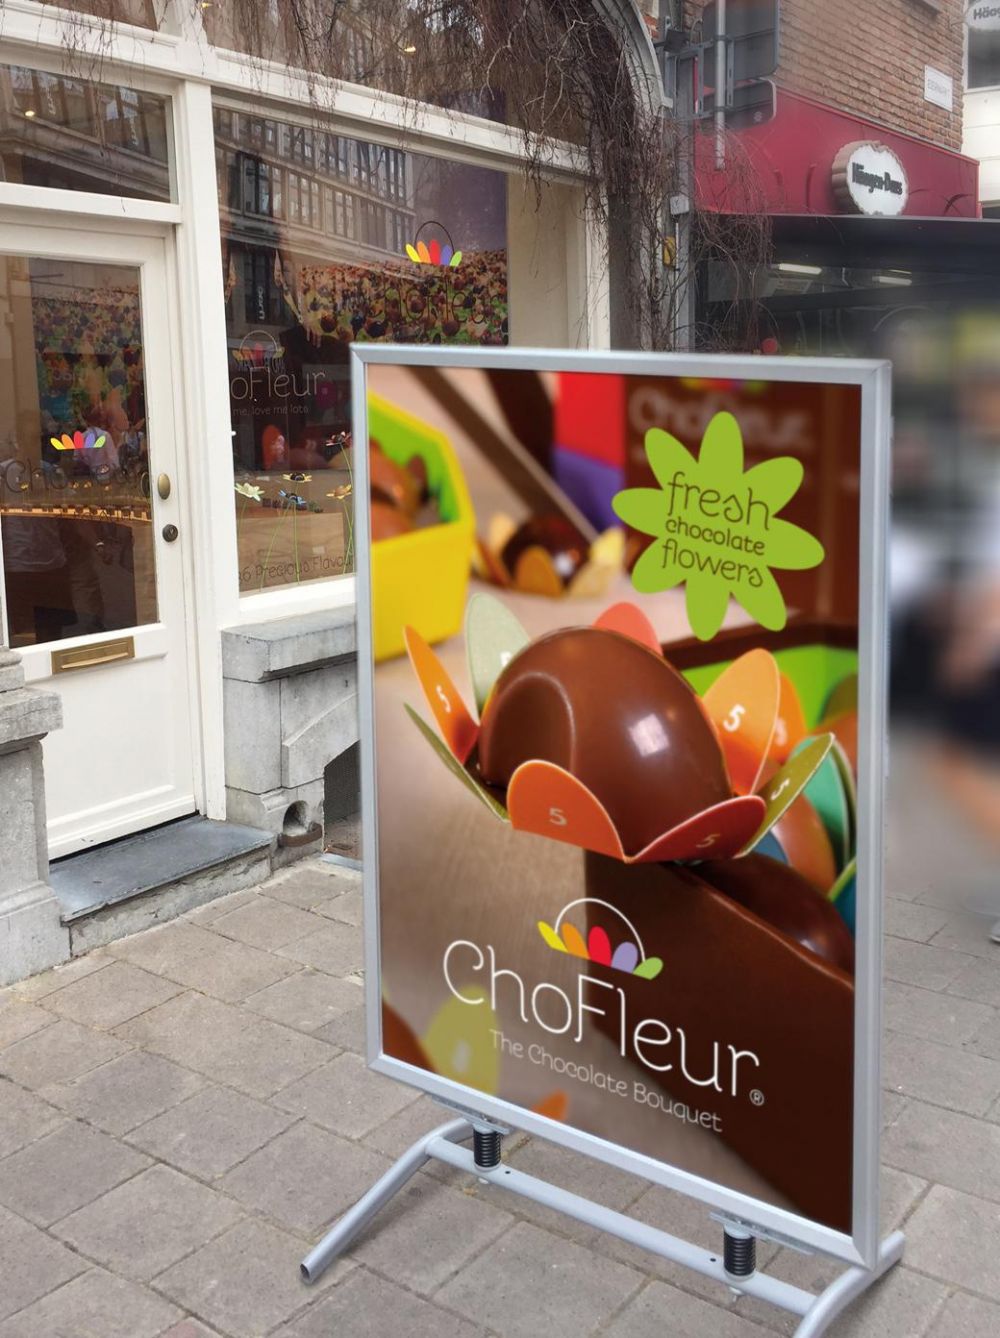 ChoFleur - Flavours to melt for - Pavement signs